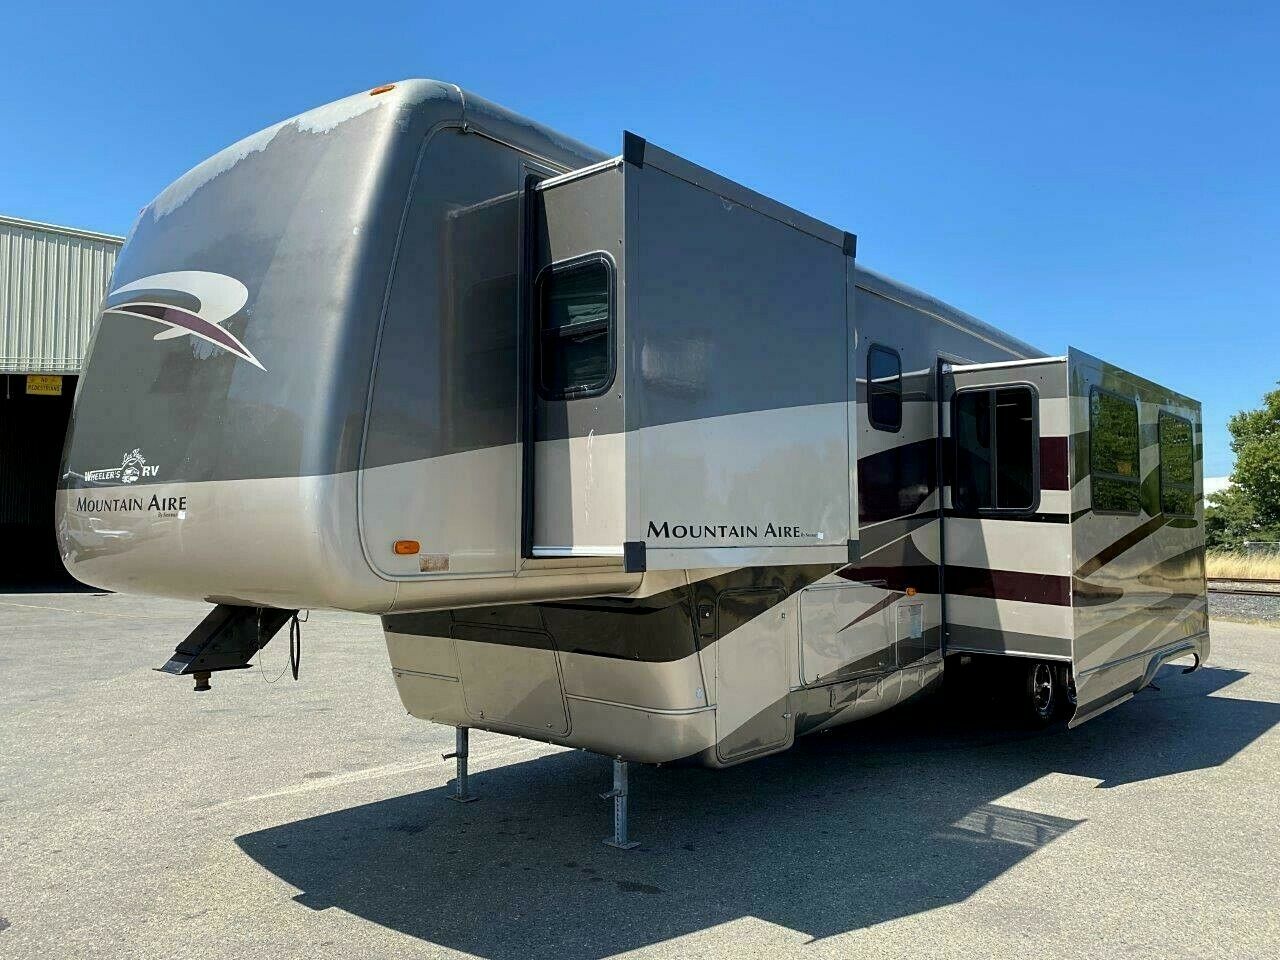 2005 NEWMAR MOUNTAIN AIRE 38SDKC LUXURY RV FIFTH WHEEL TRAILER "3 5th Wheel Camper With 3 Slide Outs